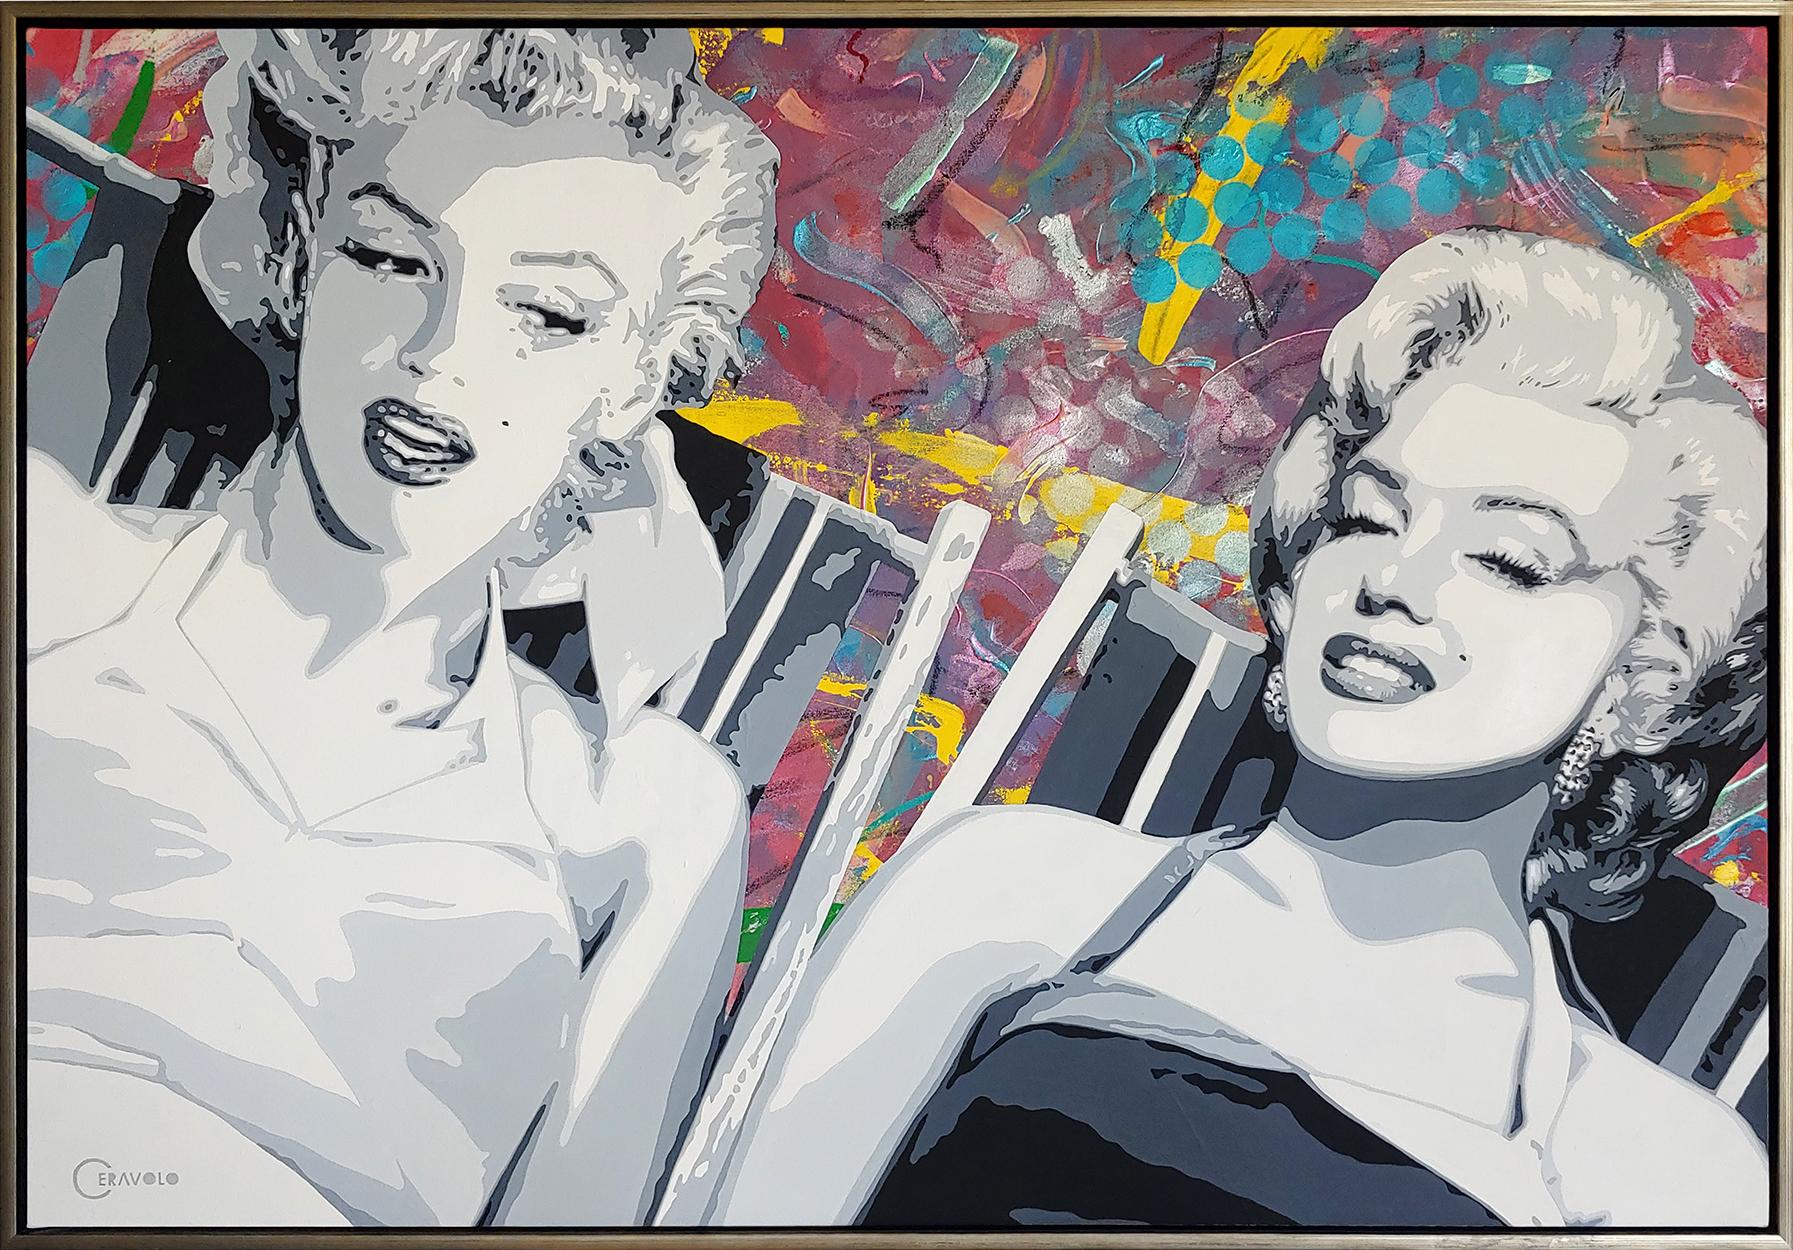 "The Fabulous Monroe Sisters" original Oil & Acrylic painting on canvas 46x66 